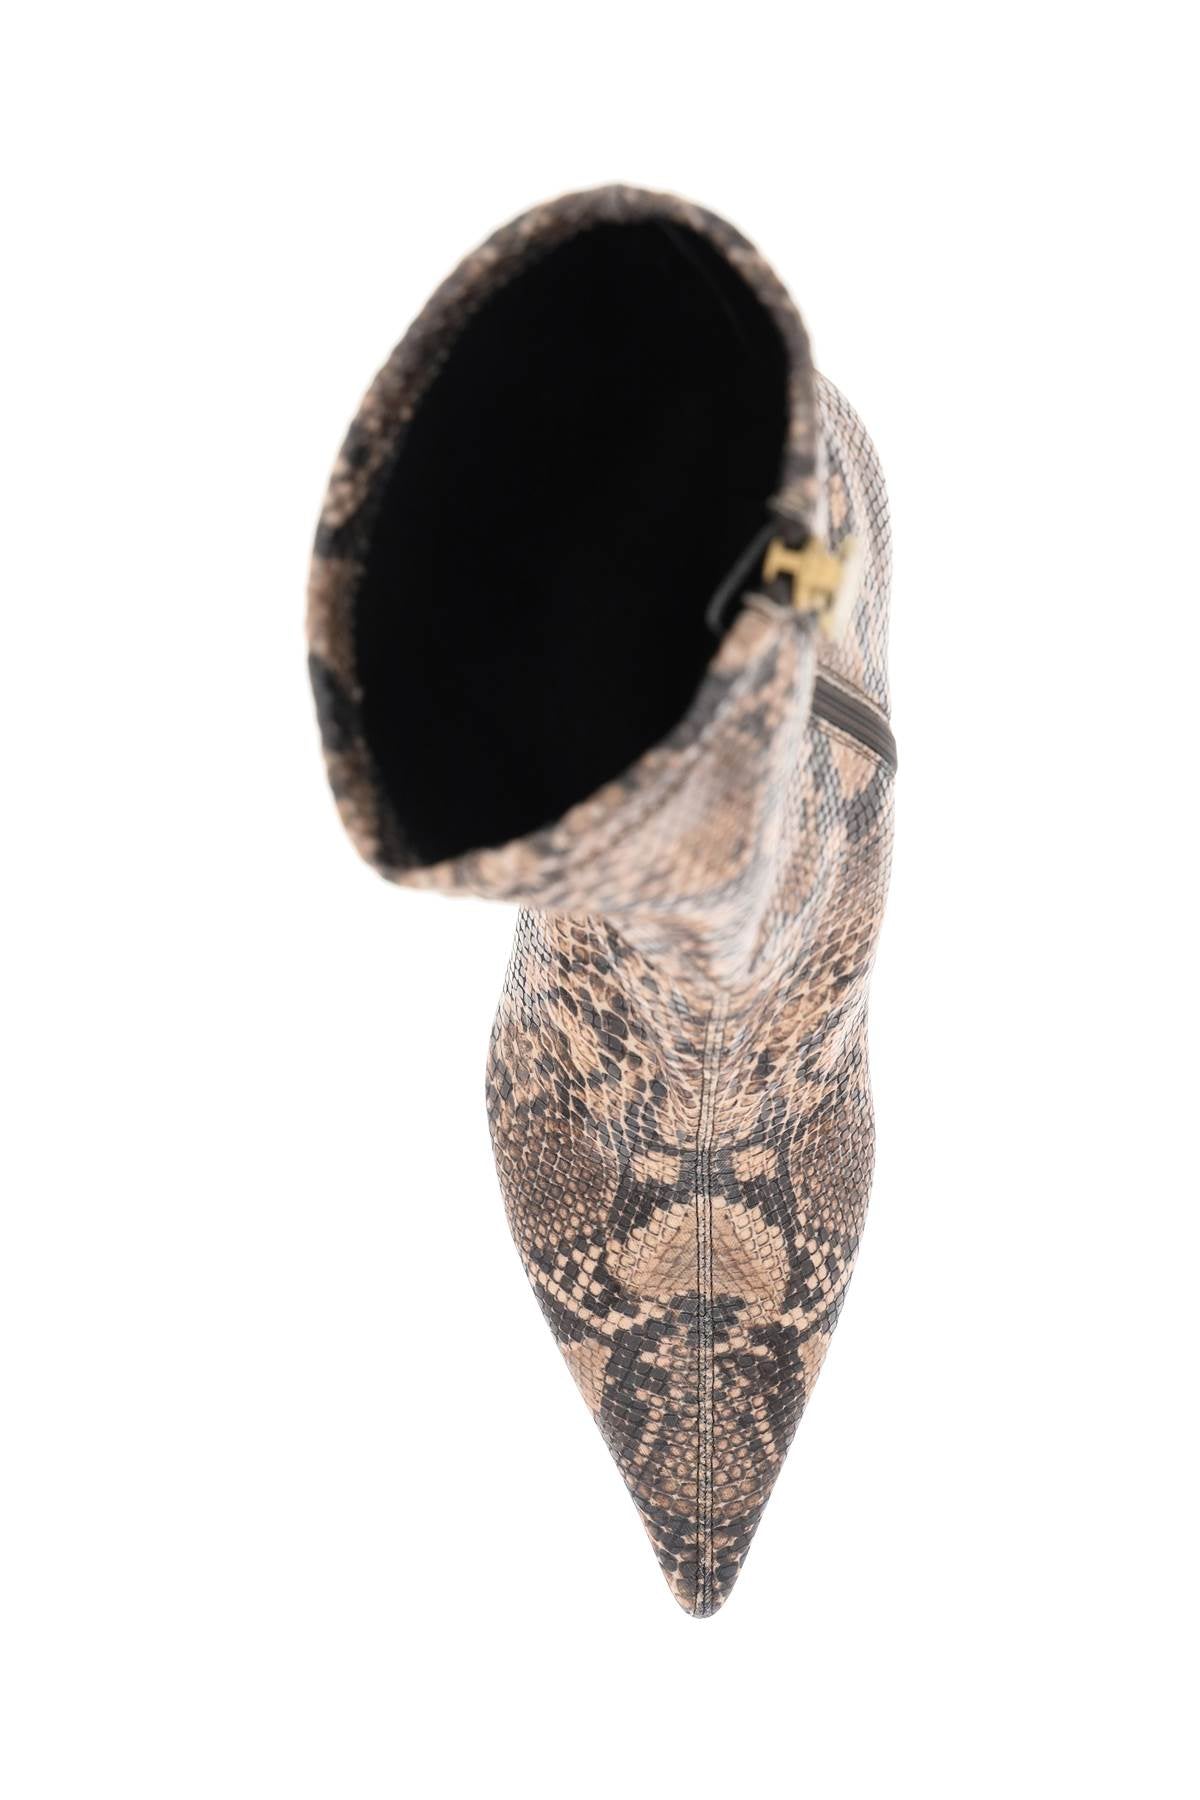 Shop Stella Mccartney Python Print Ankle Boots Women In Multicolor